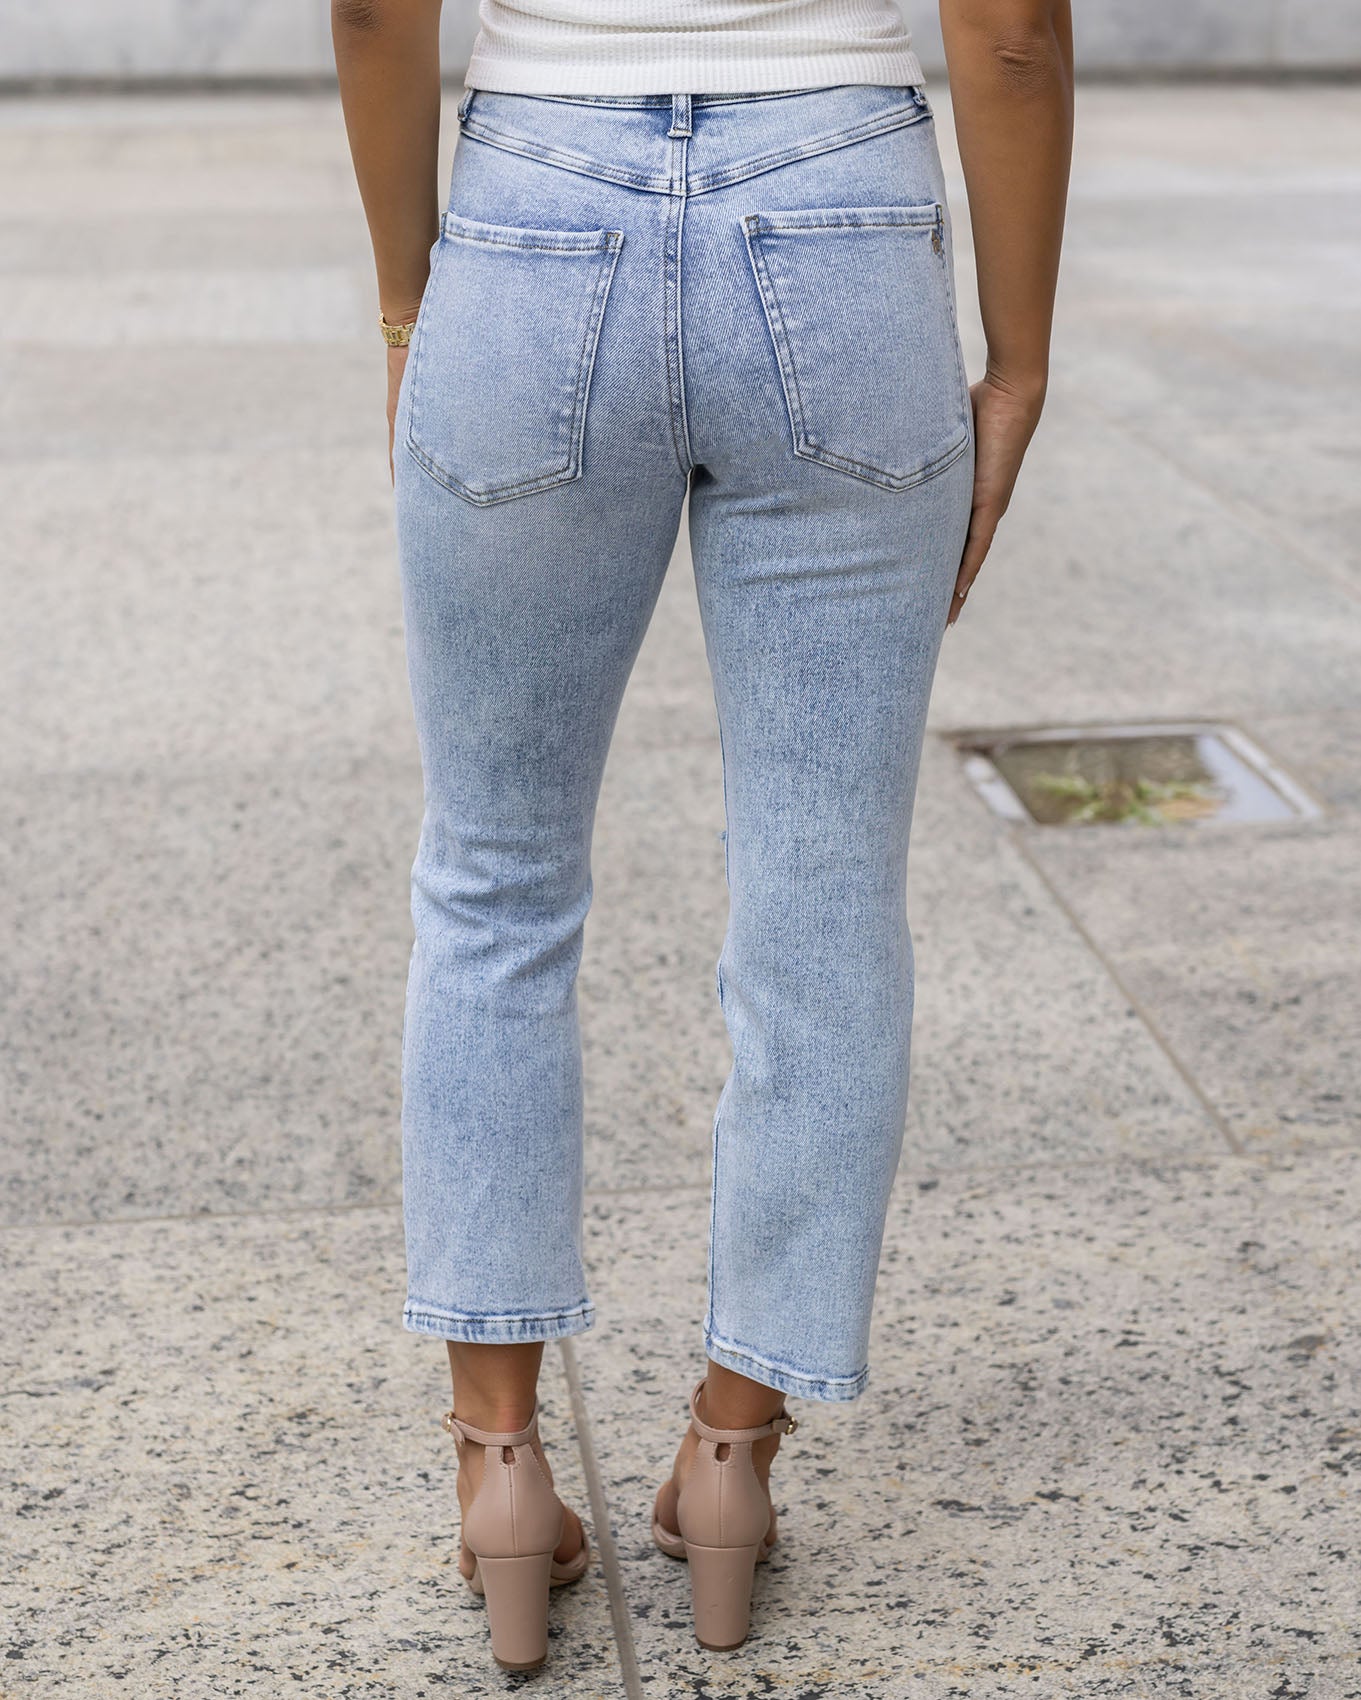 The 18 Best Mom Jeans - 18 FUPA-Defying Pairs of Mom Jeans